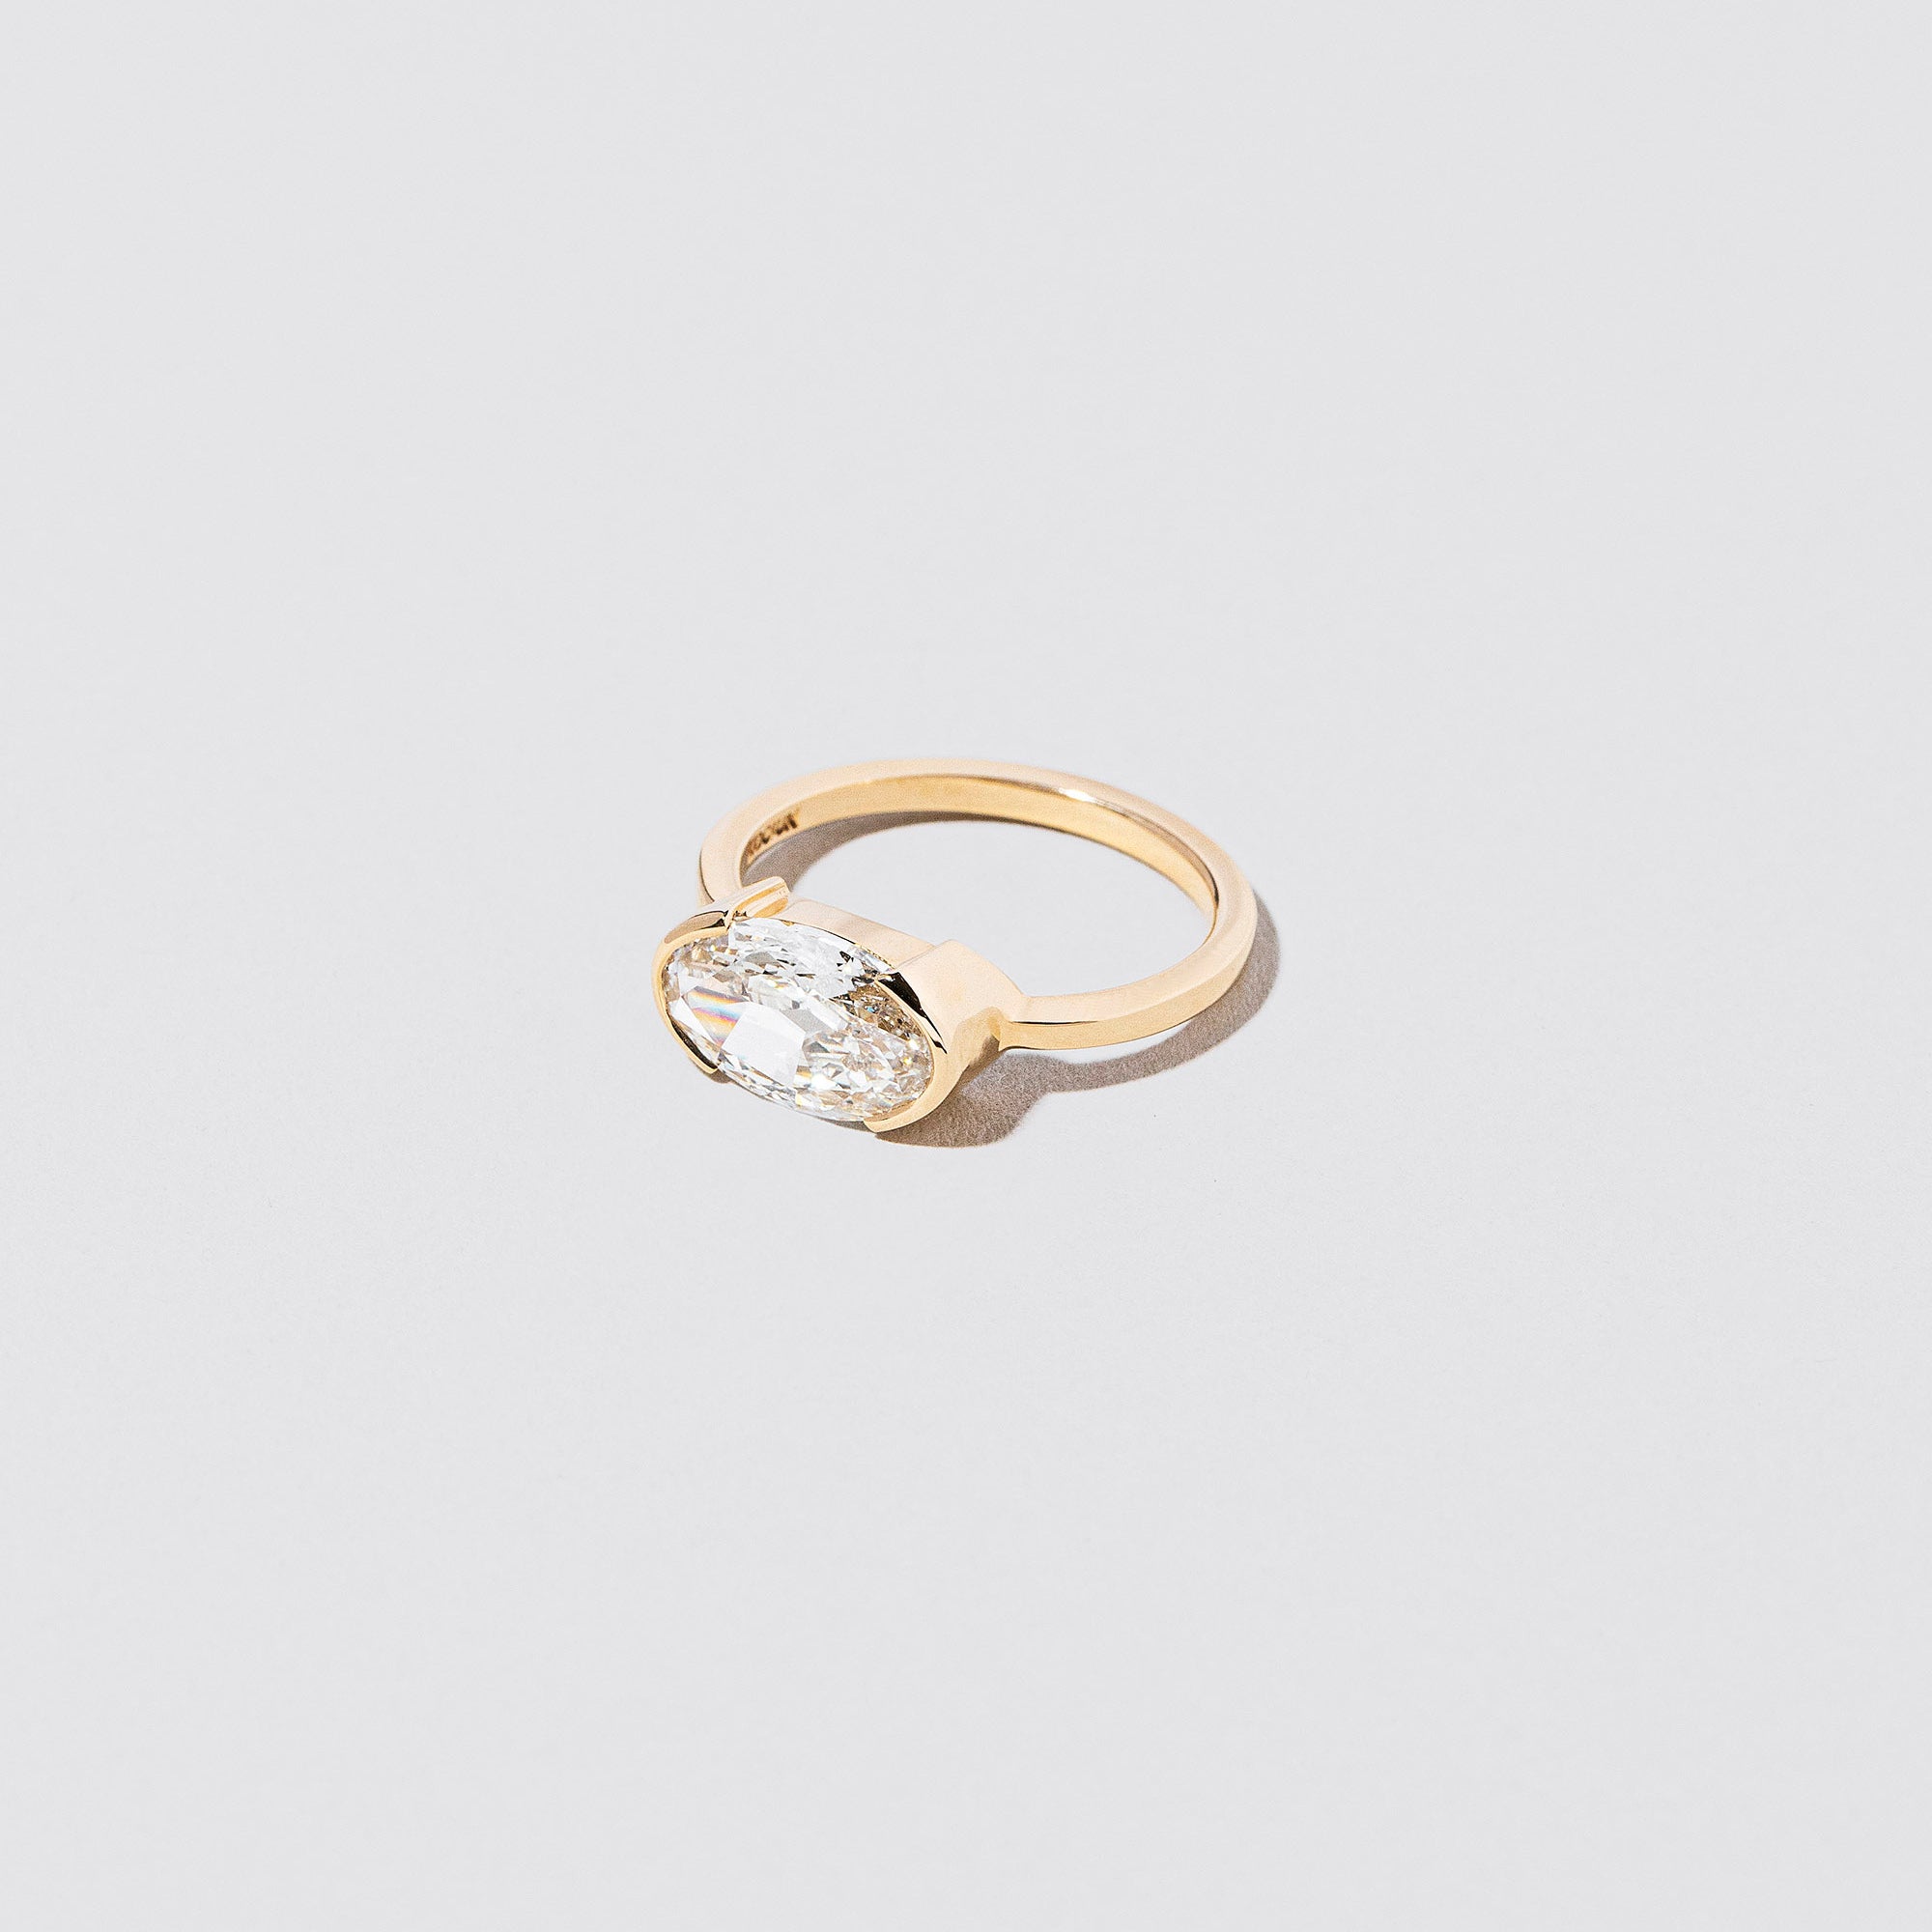 product_details:: Basis Ring on light color background.